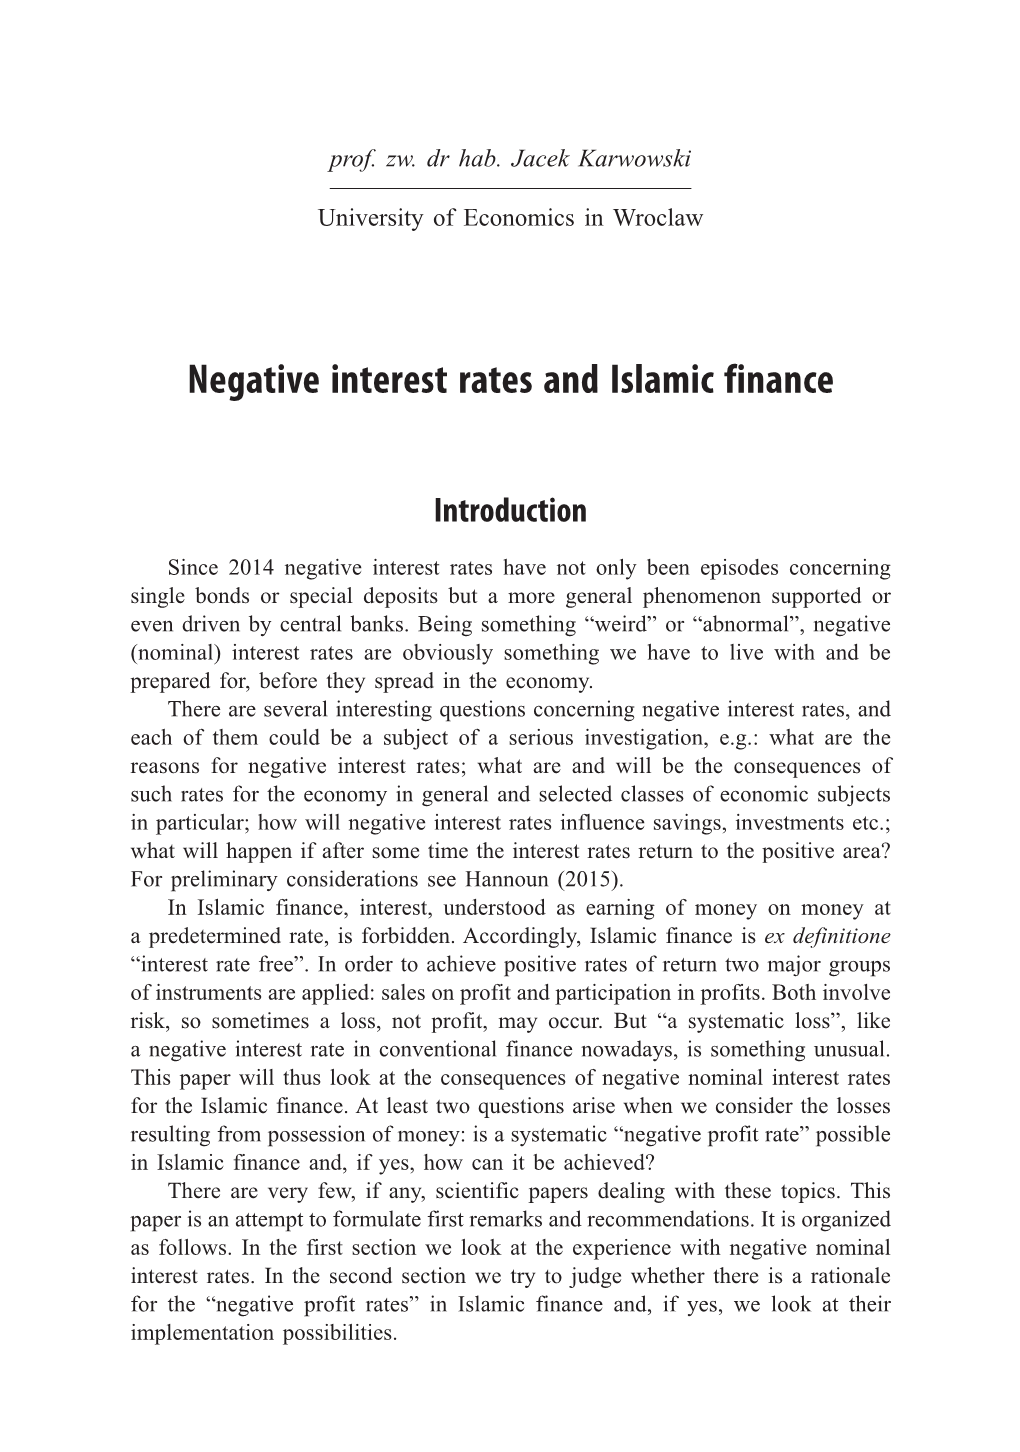 Negative Interest Rates and Islamic Finance Introduction